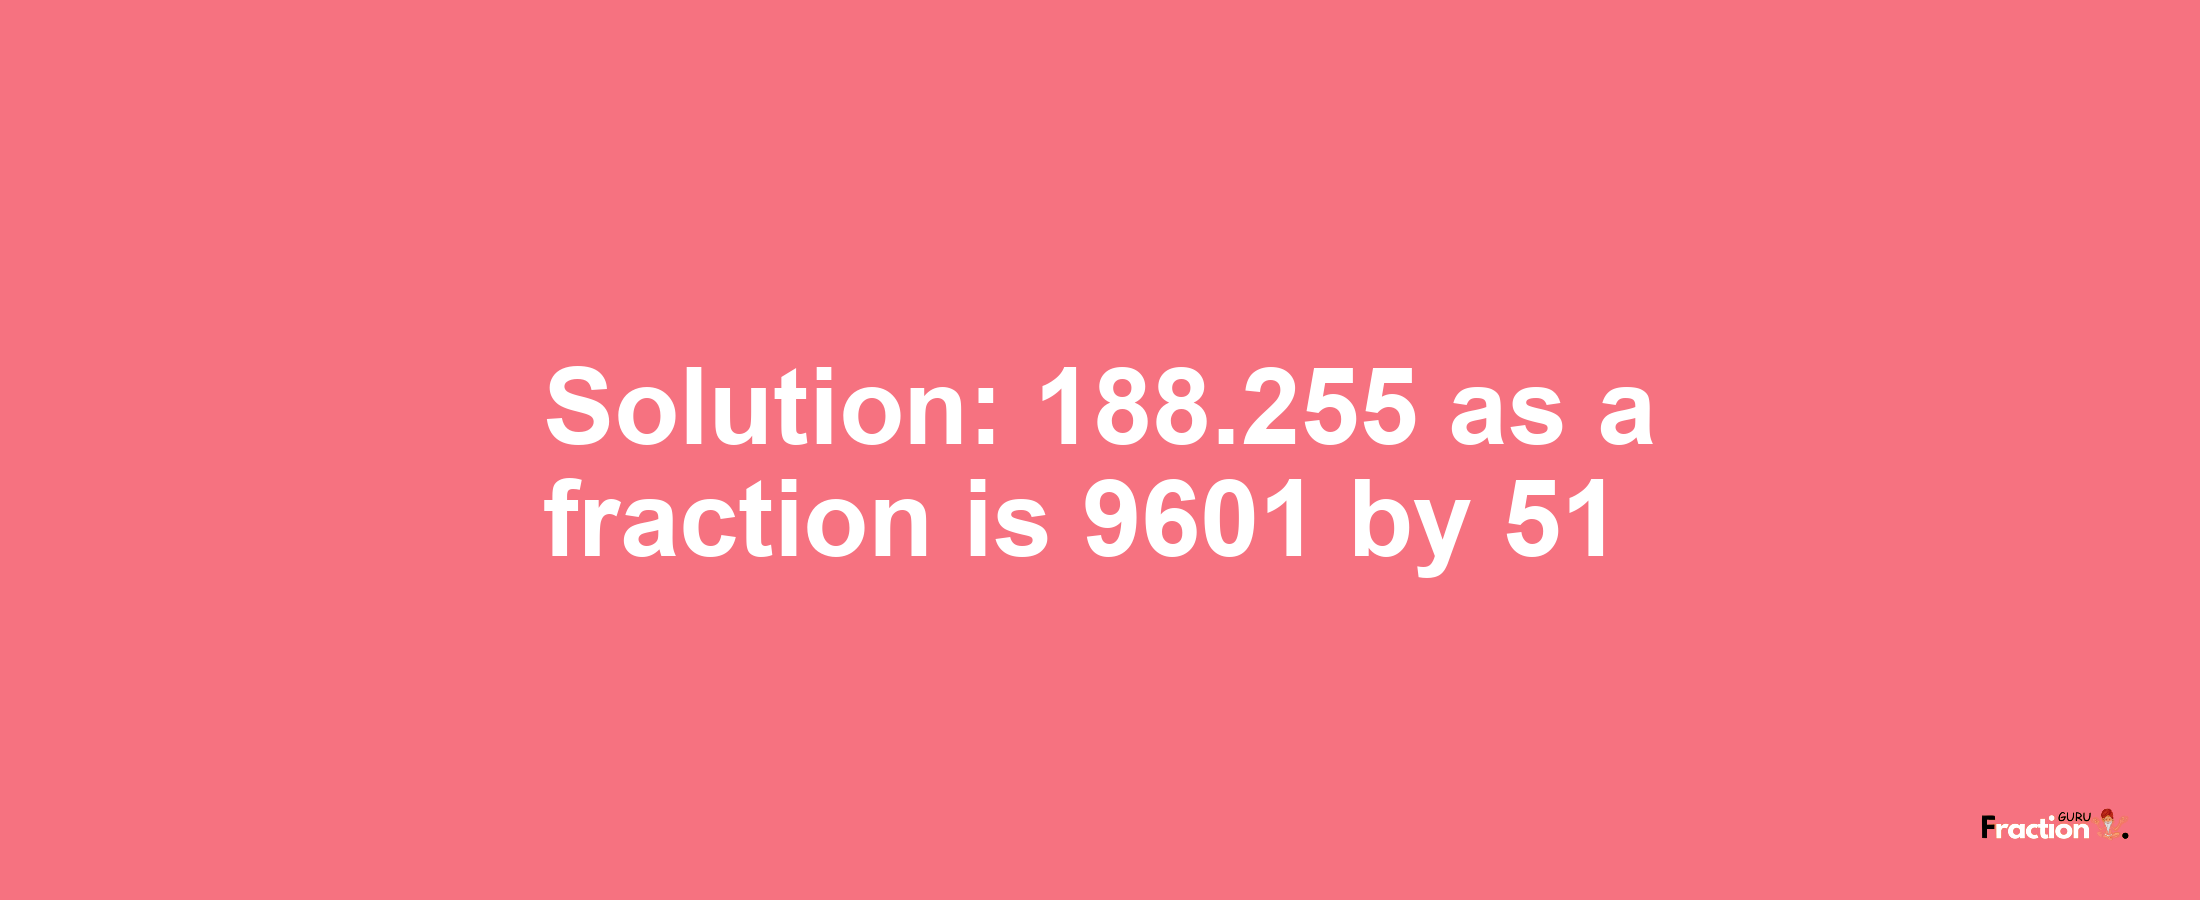 Solution:188.255 as a fraction is 9601/51